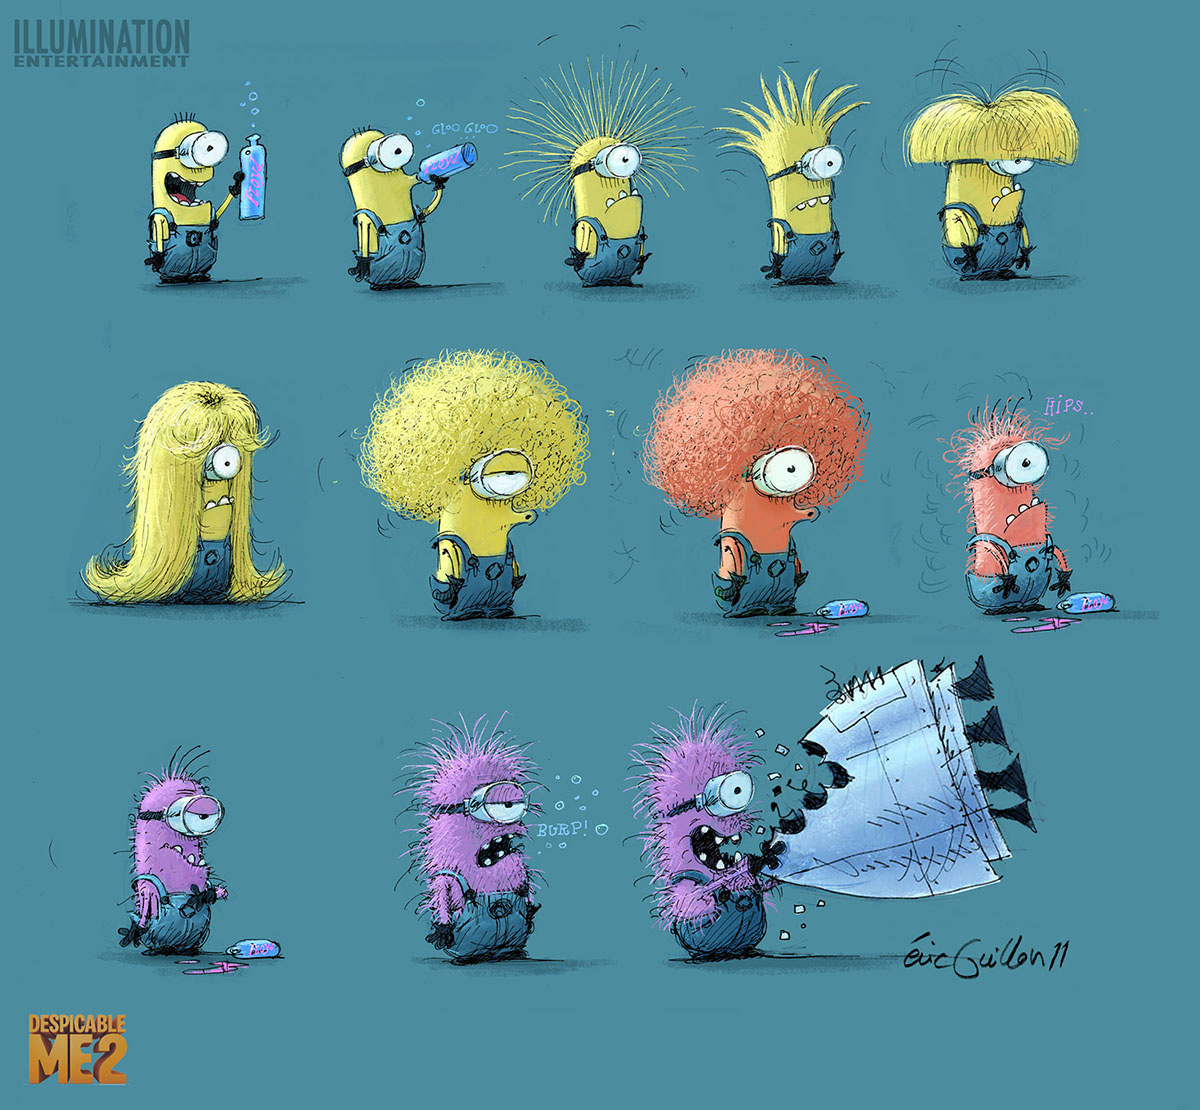 Despicable Me 2 Concept Art And Illustrations By Eric Guillon Concept Art World